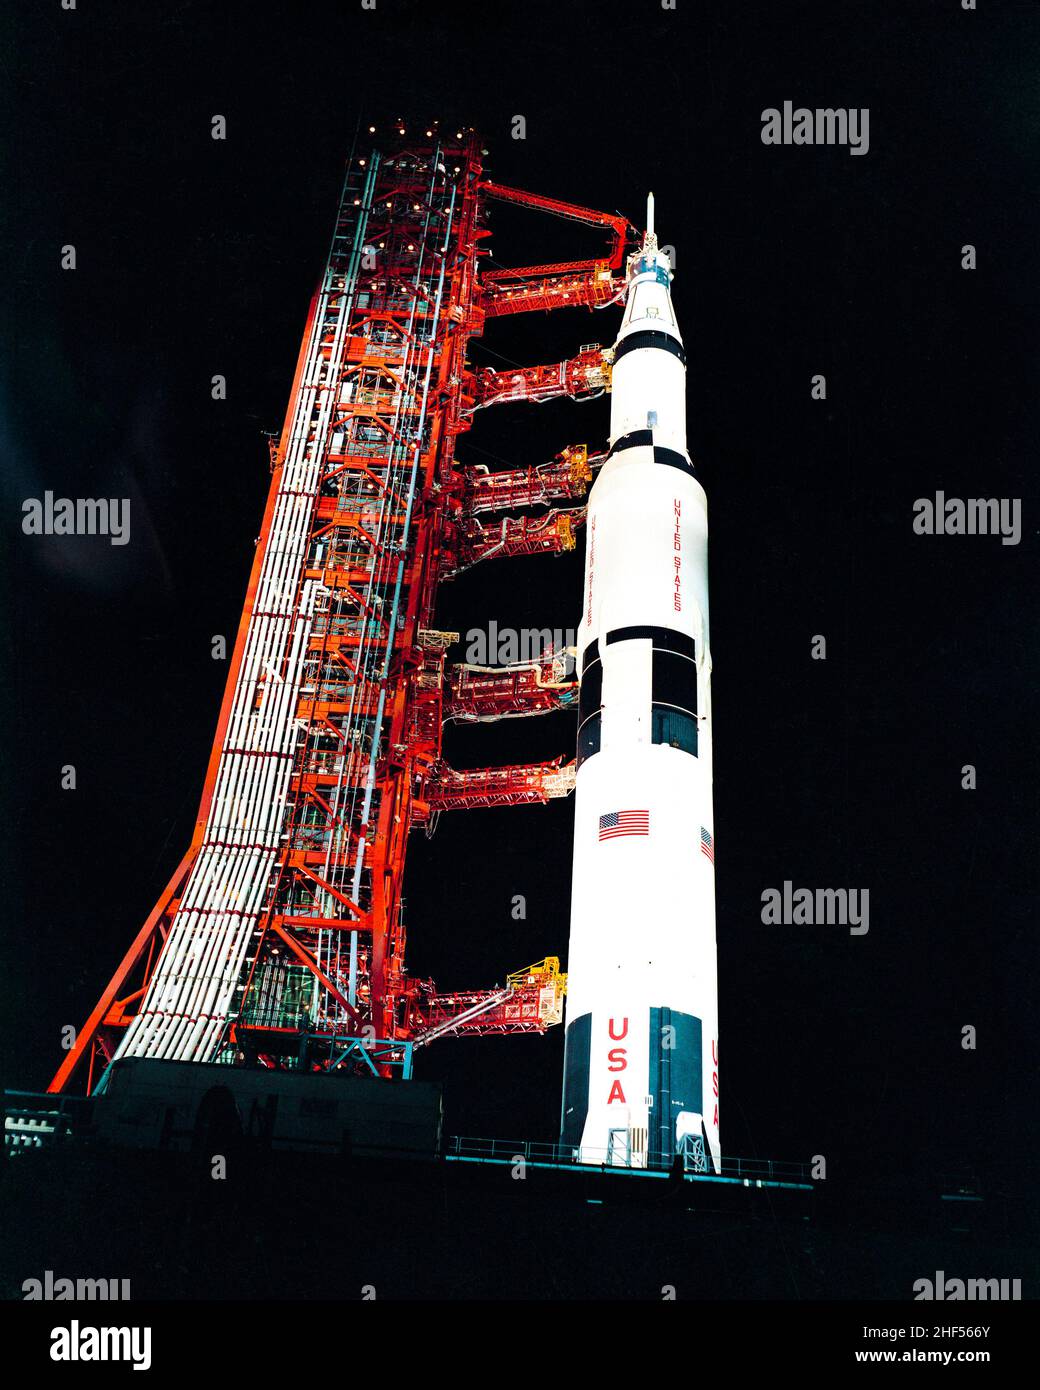 Nighttime, ground level view of Pad A, Launch Complex 39, Kennedy Space Center, showing the Apollo 13. Original from NASA. Stock Photo